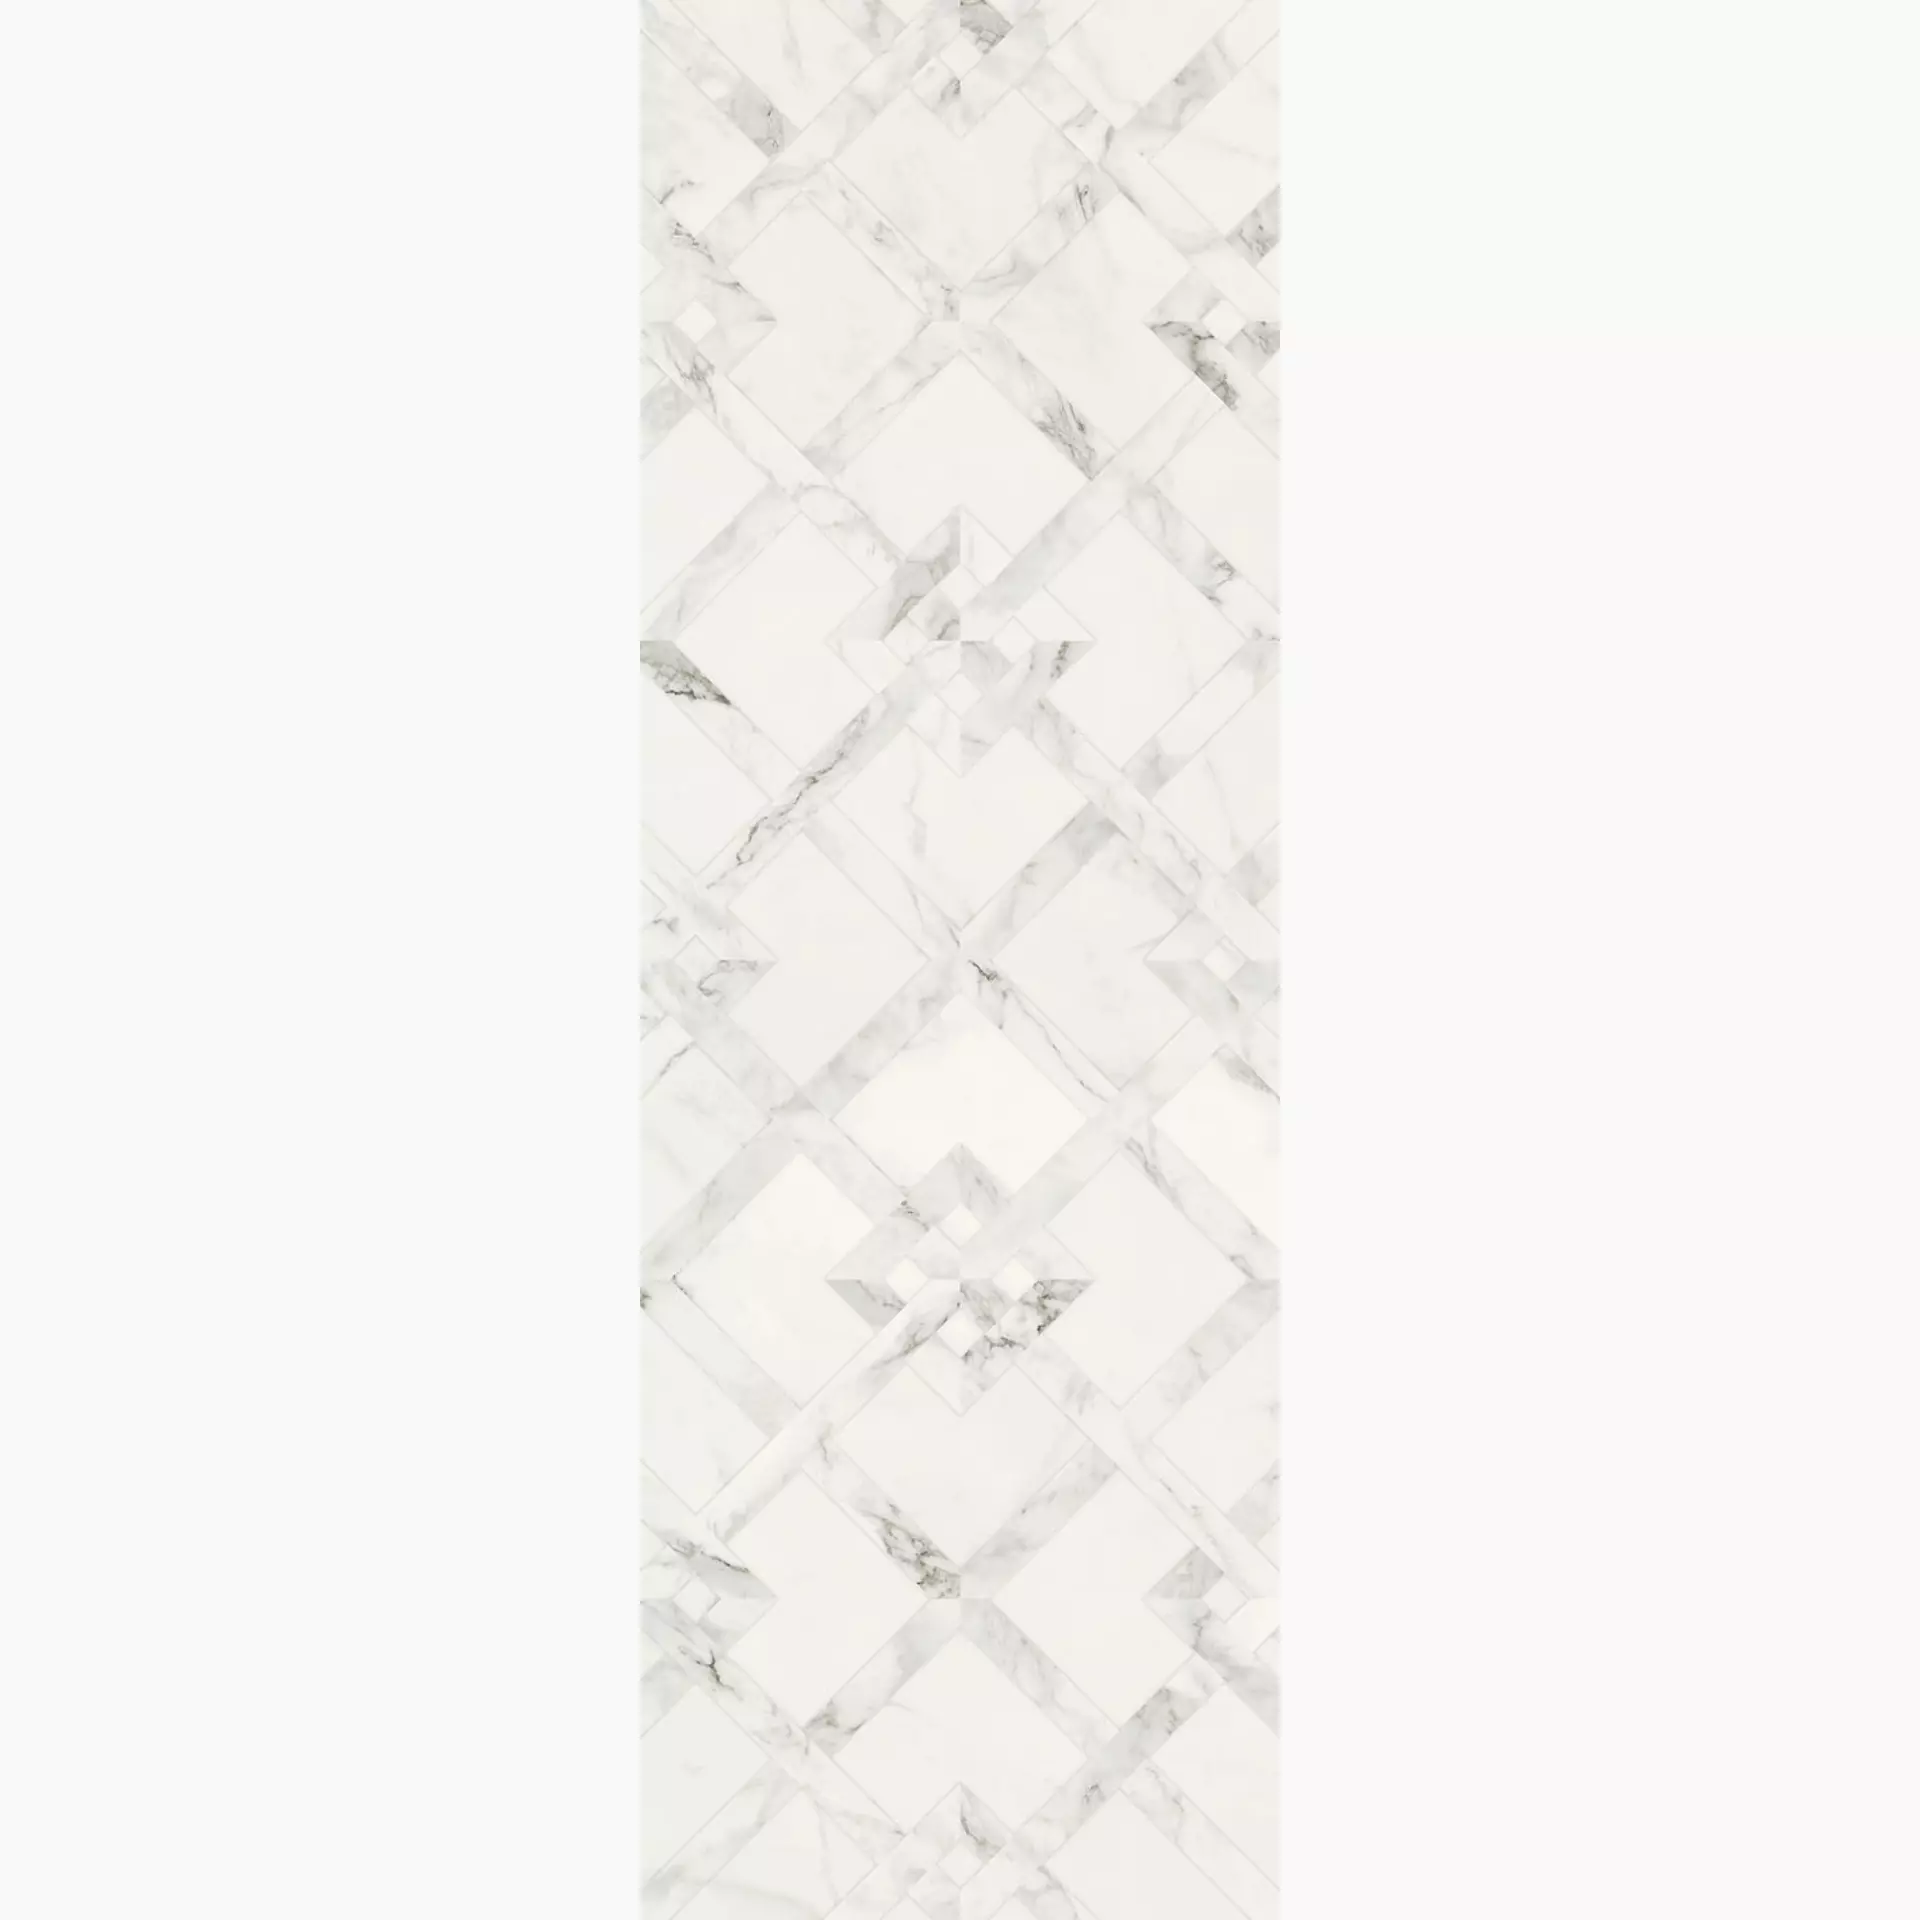 Villeroy & Boch Marble Arch Magic White Glossy Decor 1440-MA01 40x120cm rectified 11mm